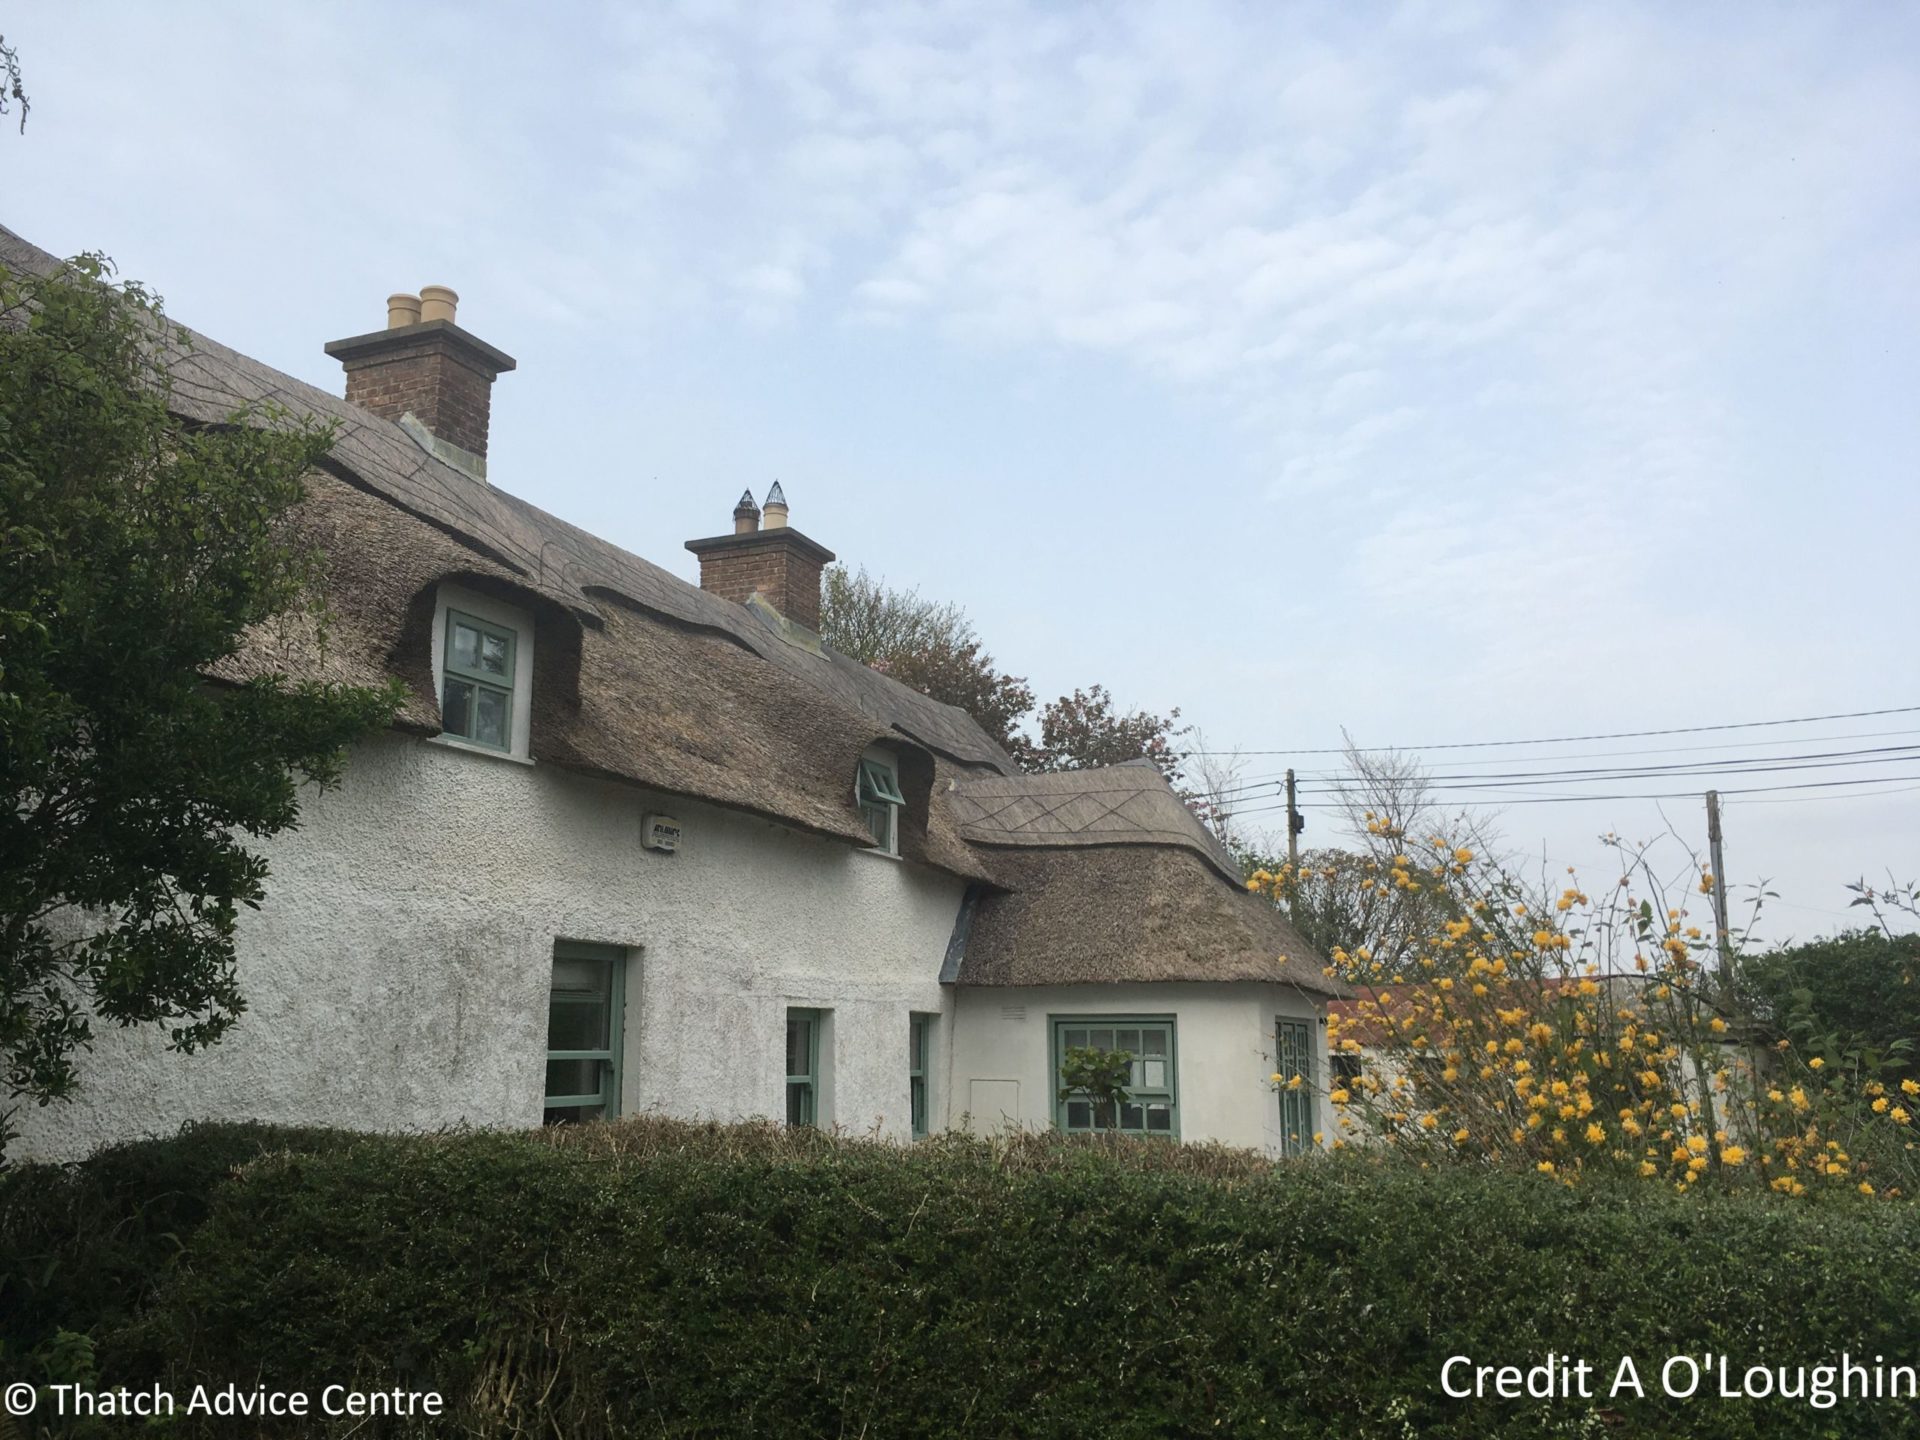 Thatch Advice Centre article on insuring thatch in the ROI 4